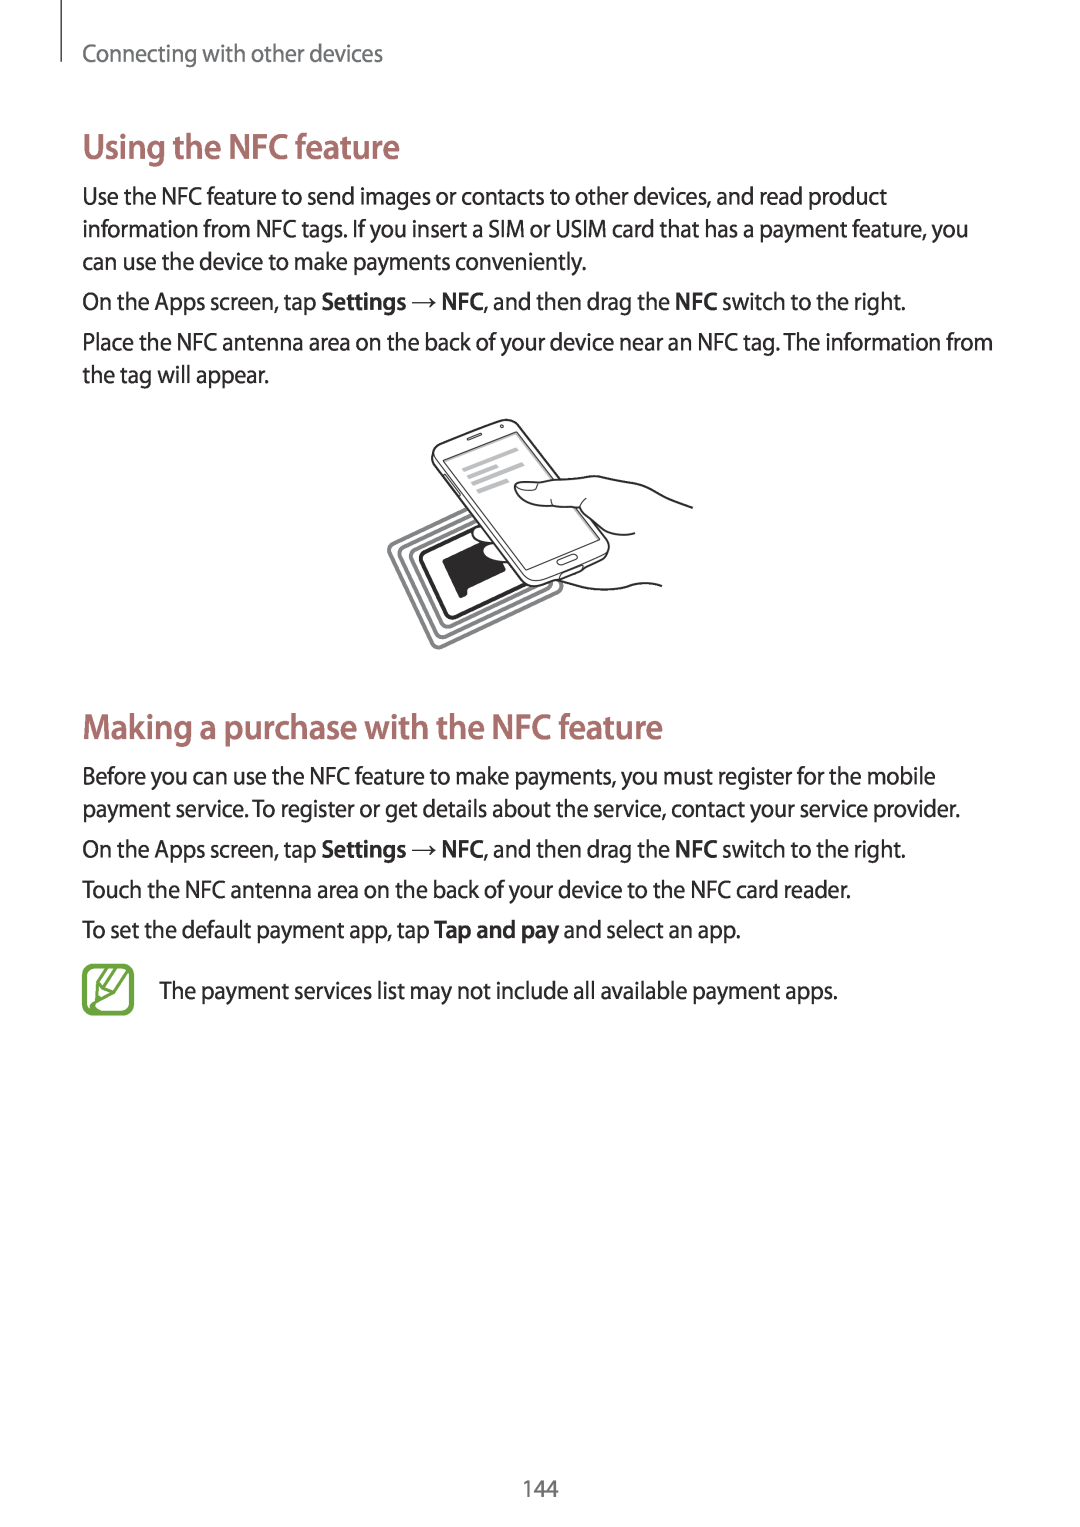 Samsung SM-G901FZKAVGR manual Using the NFC feature, Making a purchase with the NFC feature, Connecting with other devices 